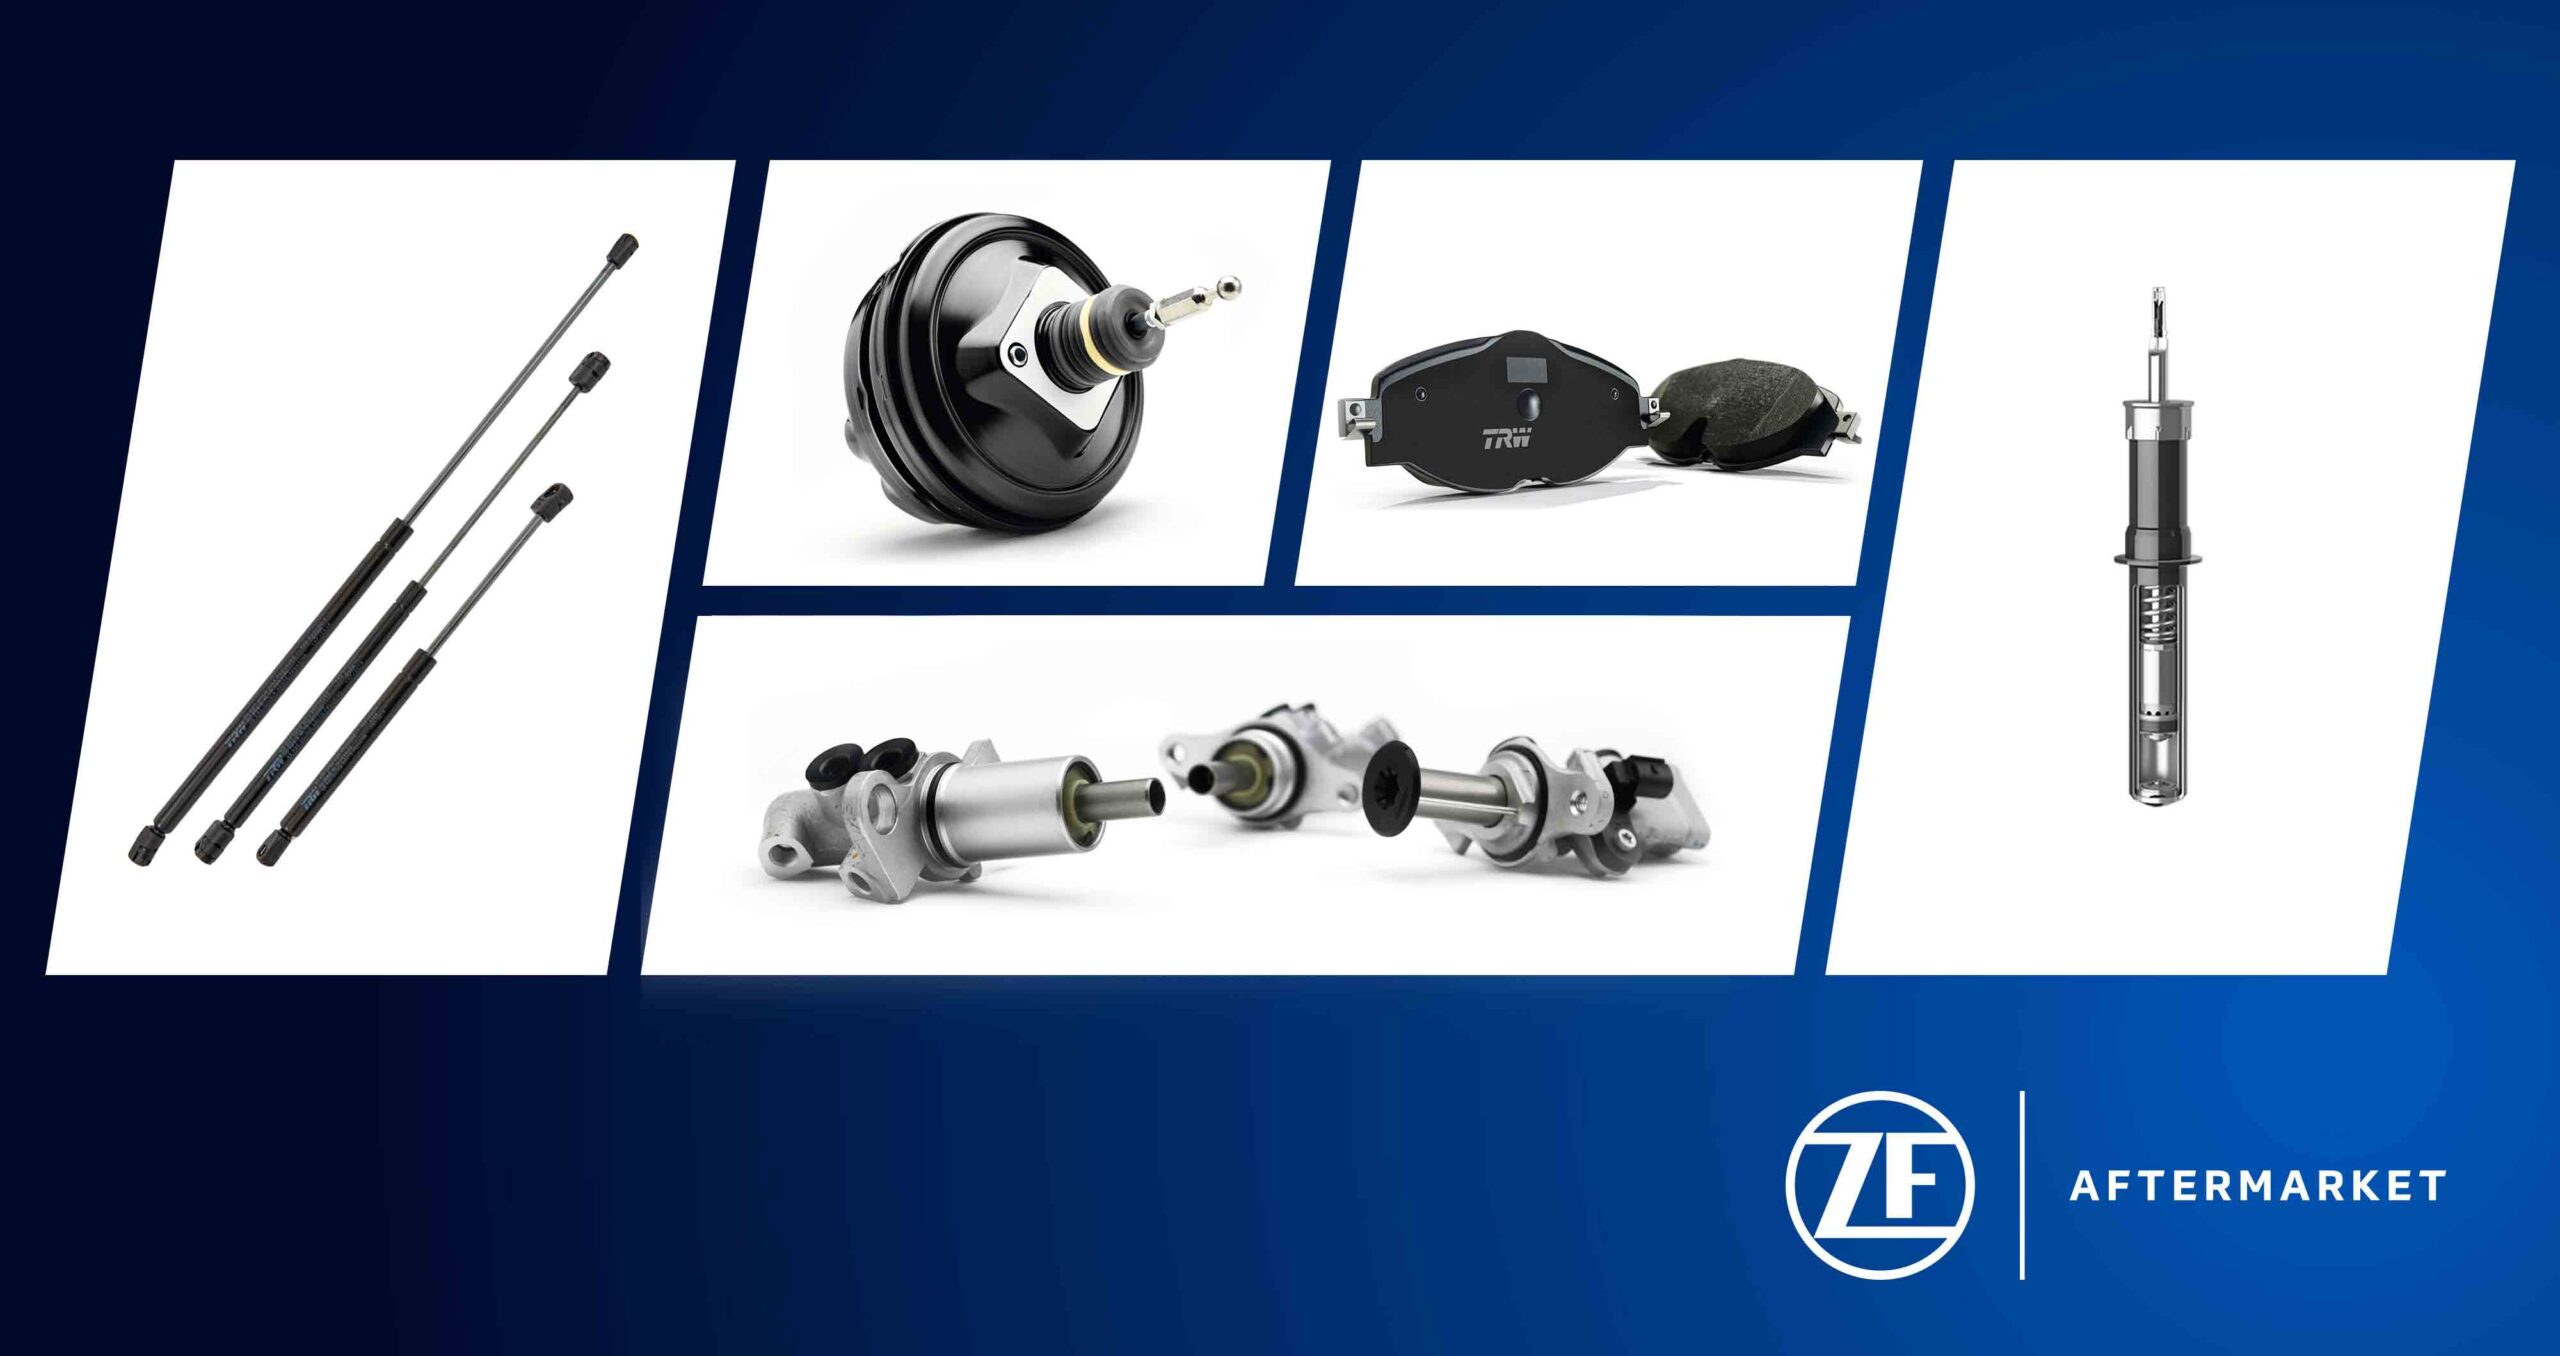 ZF Aftermarket Product Introductions Cover 158.2M VIO